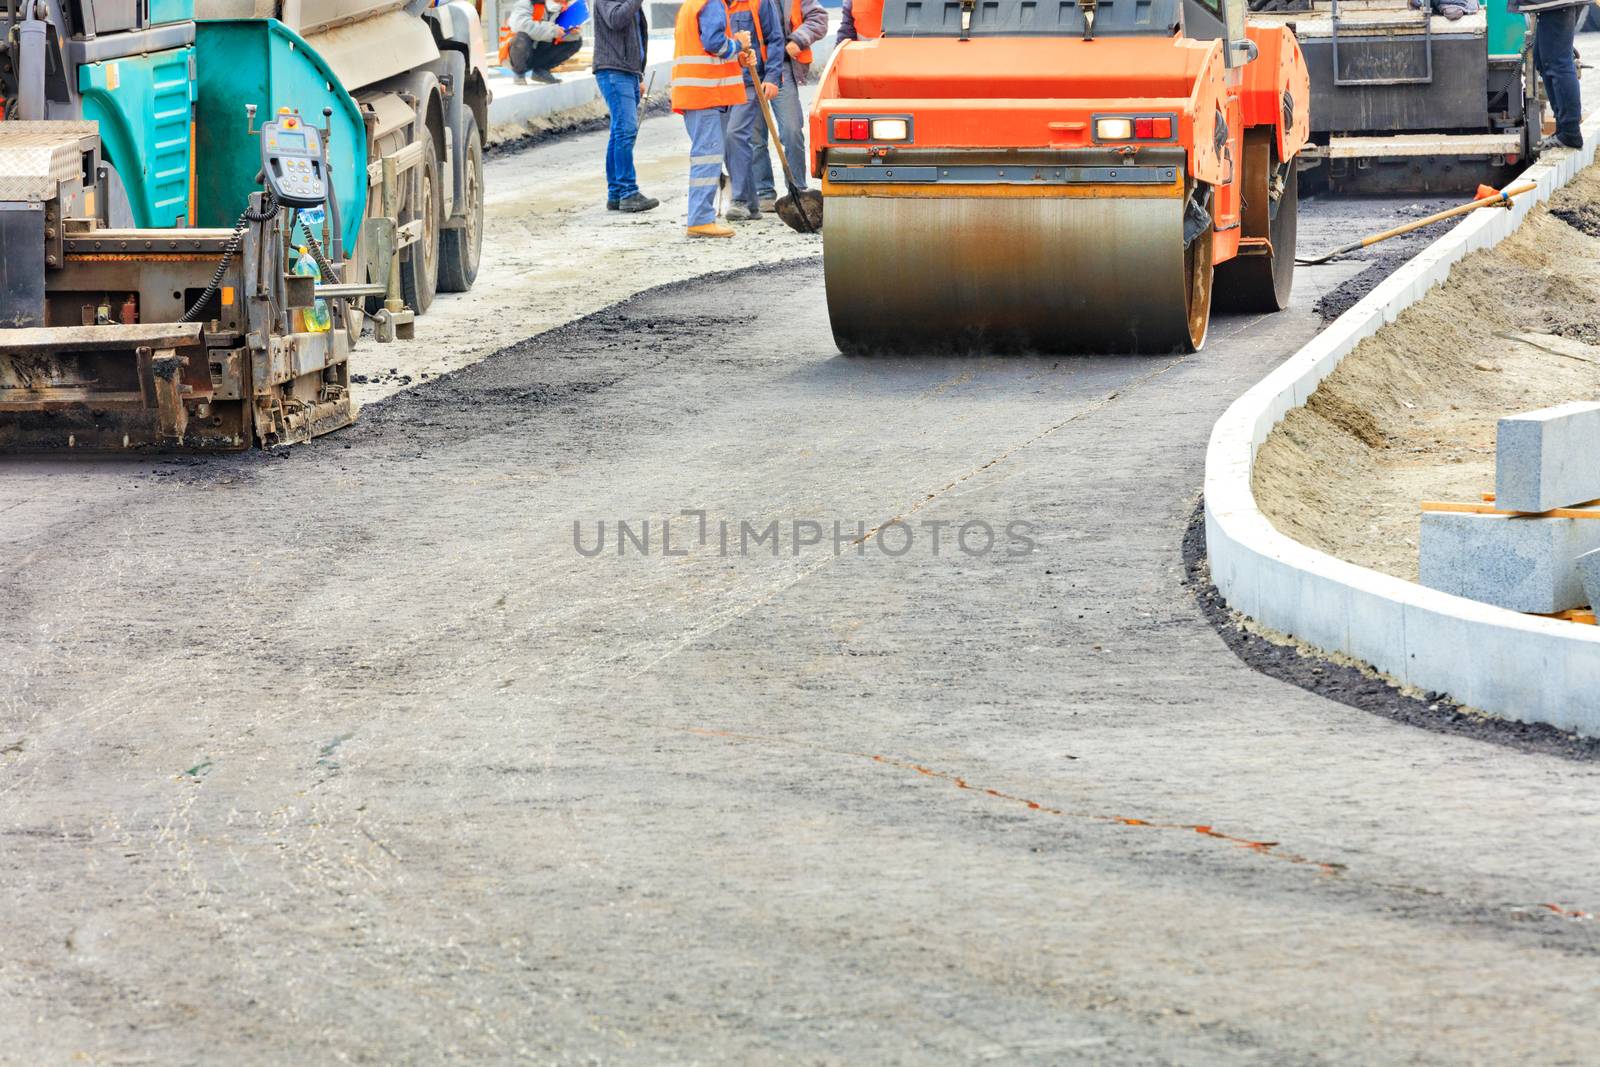 Heavy road equipment, such as pavers and a road vibratory roller, are serviced by a road maintenance team to build new transport routes.